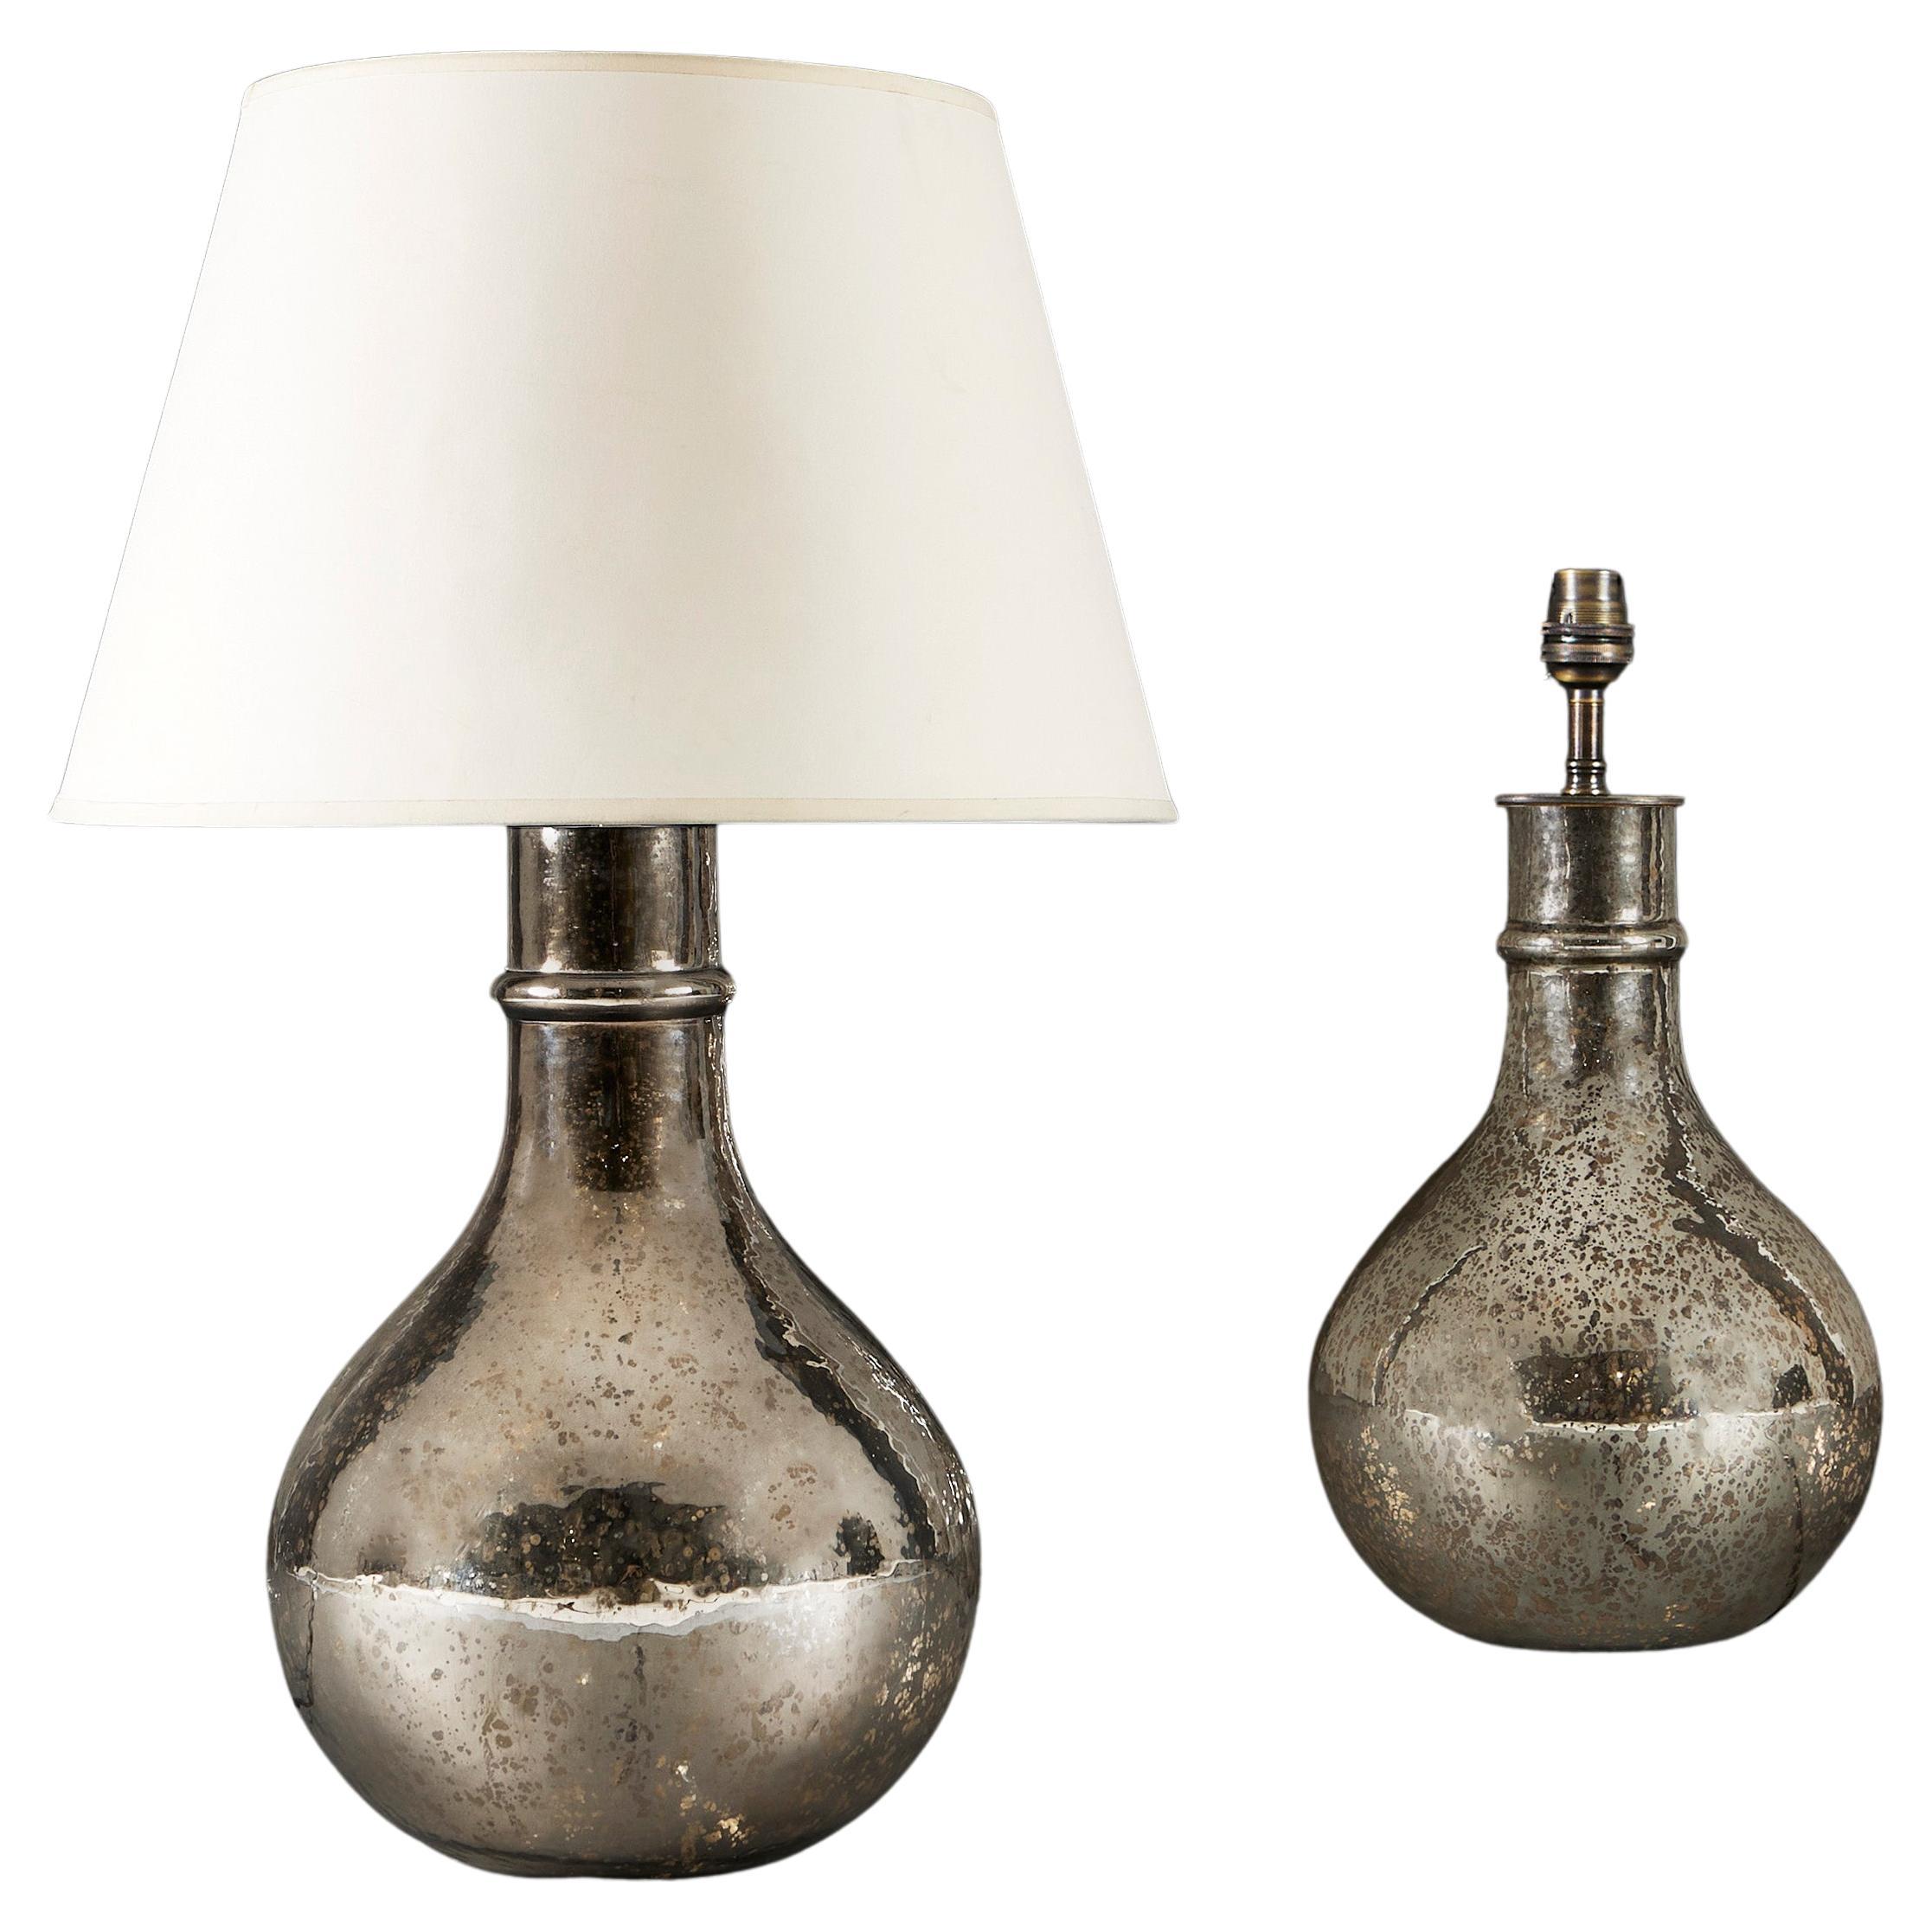 A Pair Of French Mercury Lamps For Sale